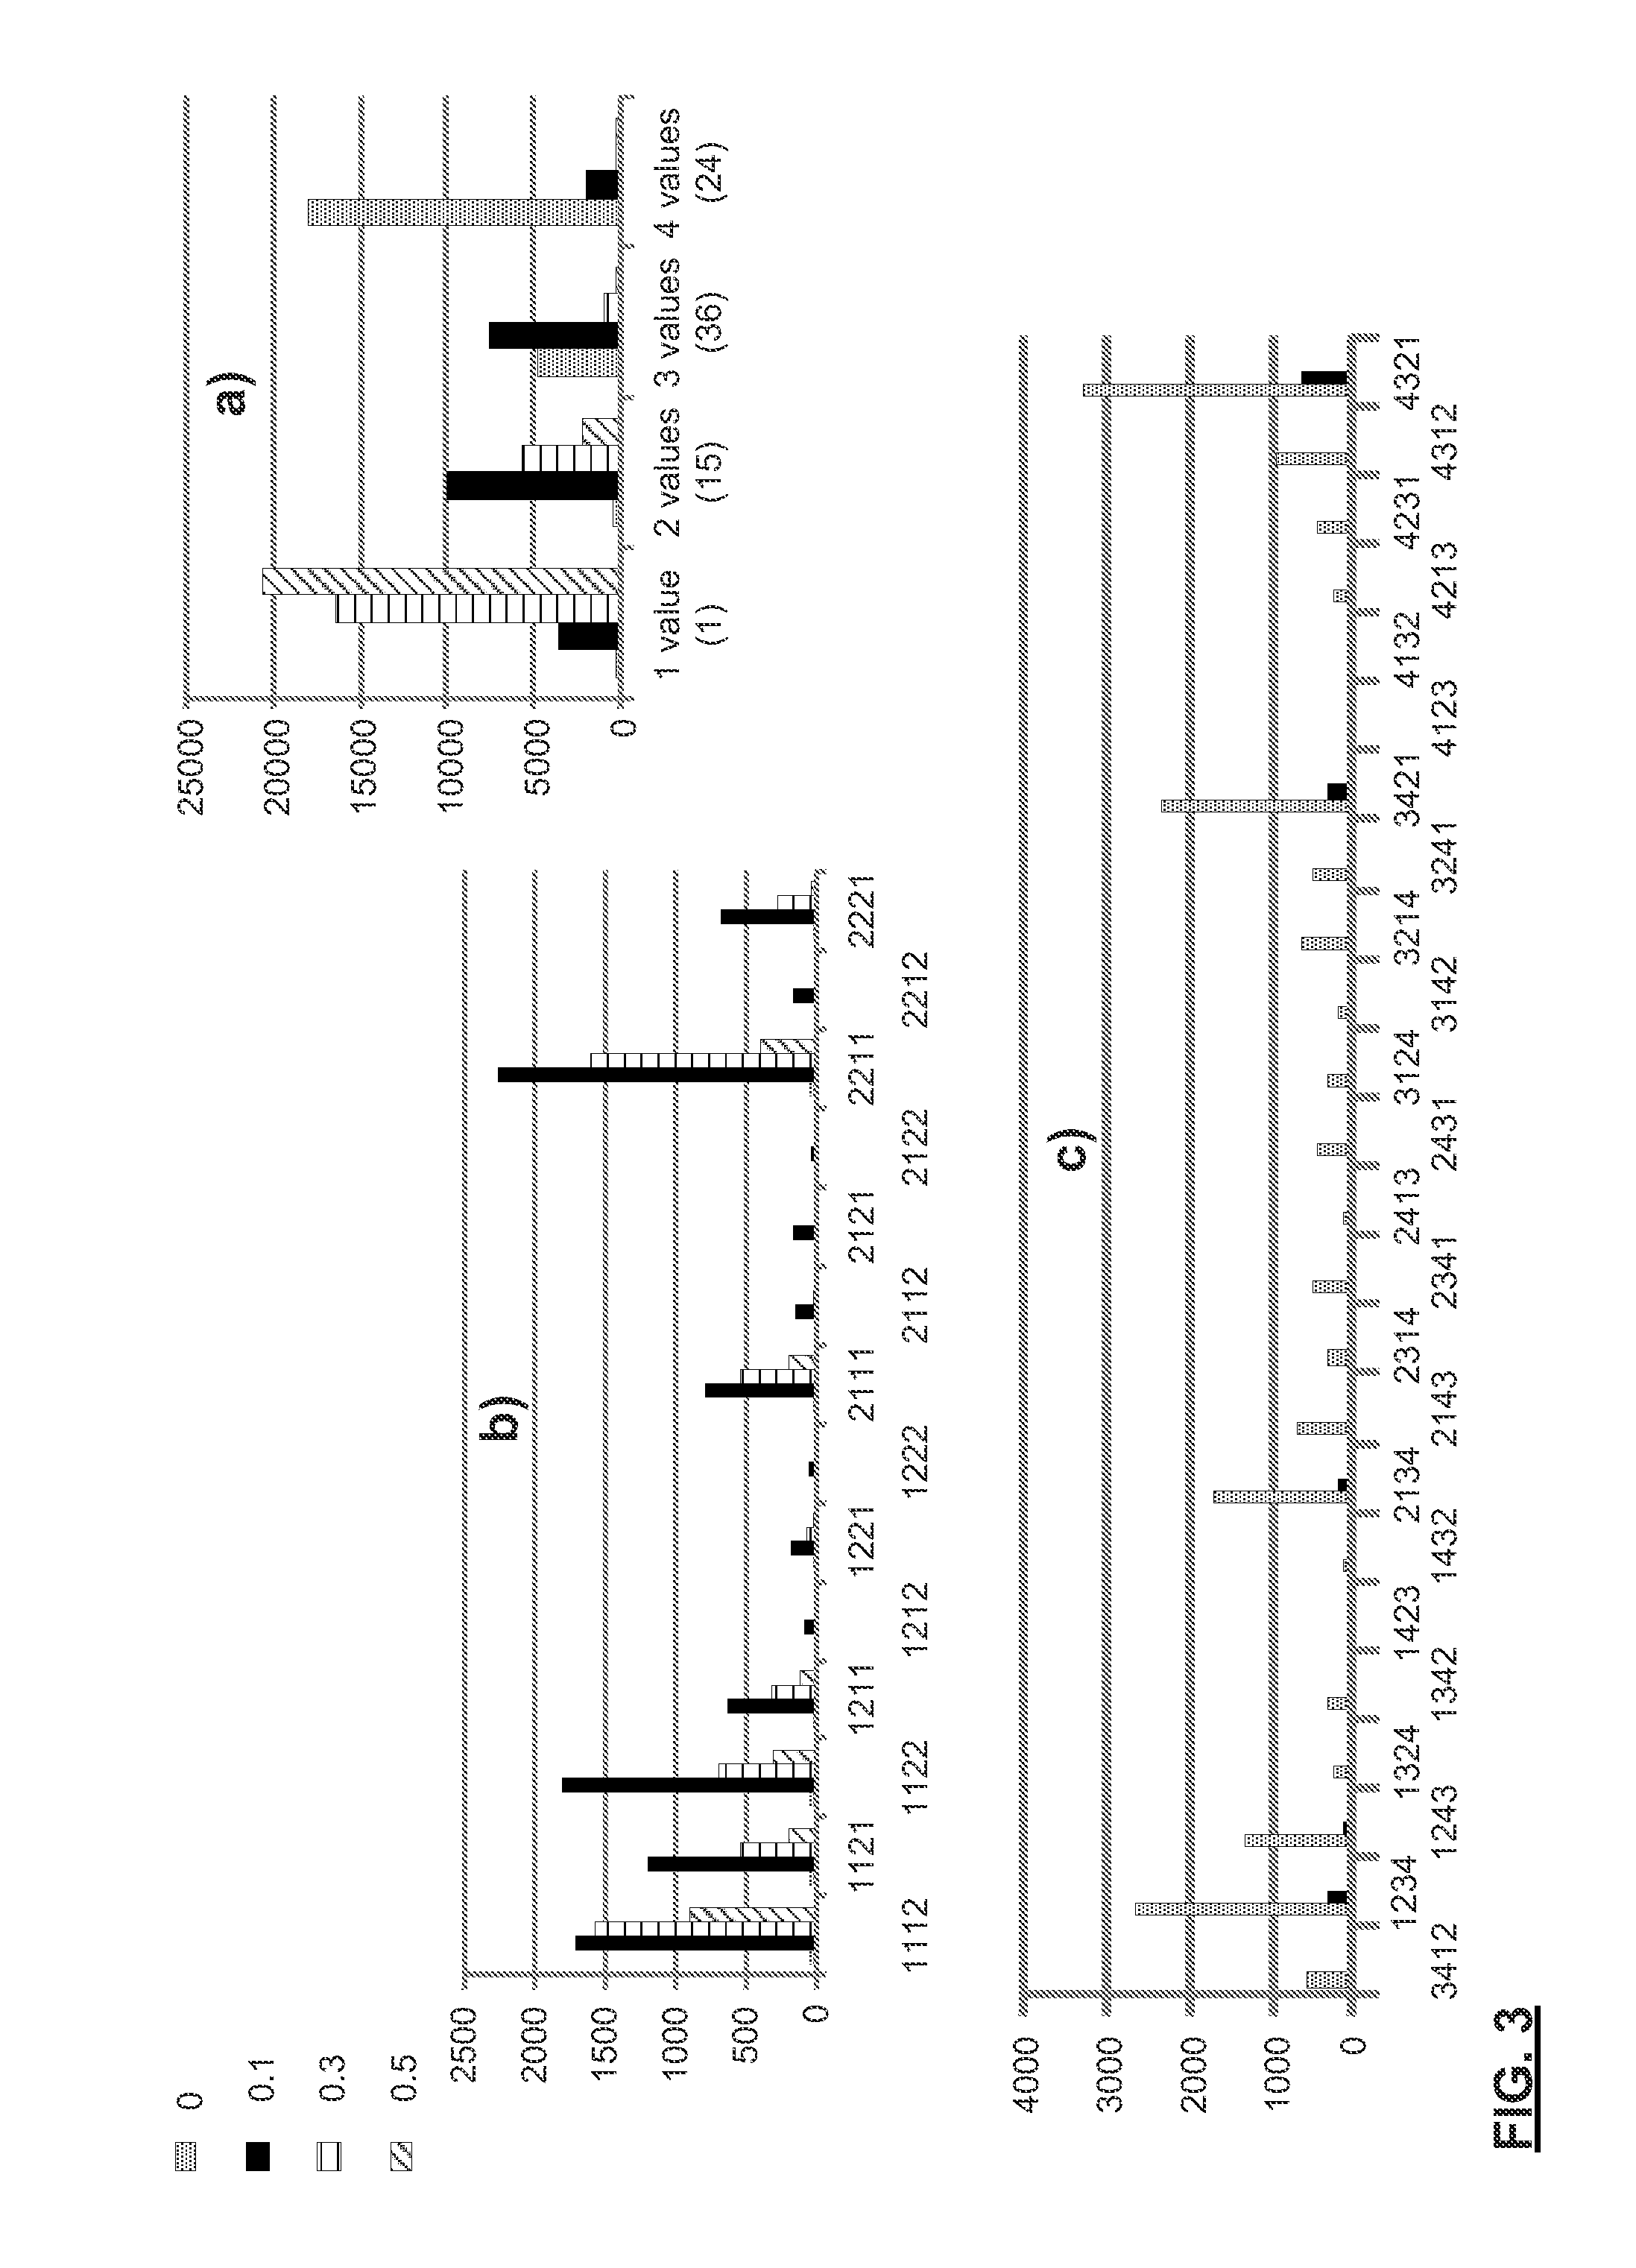 Order-preserving clustering data analysis system and method